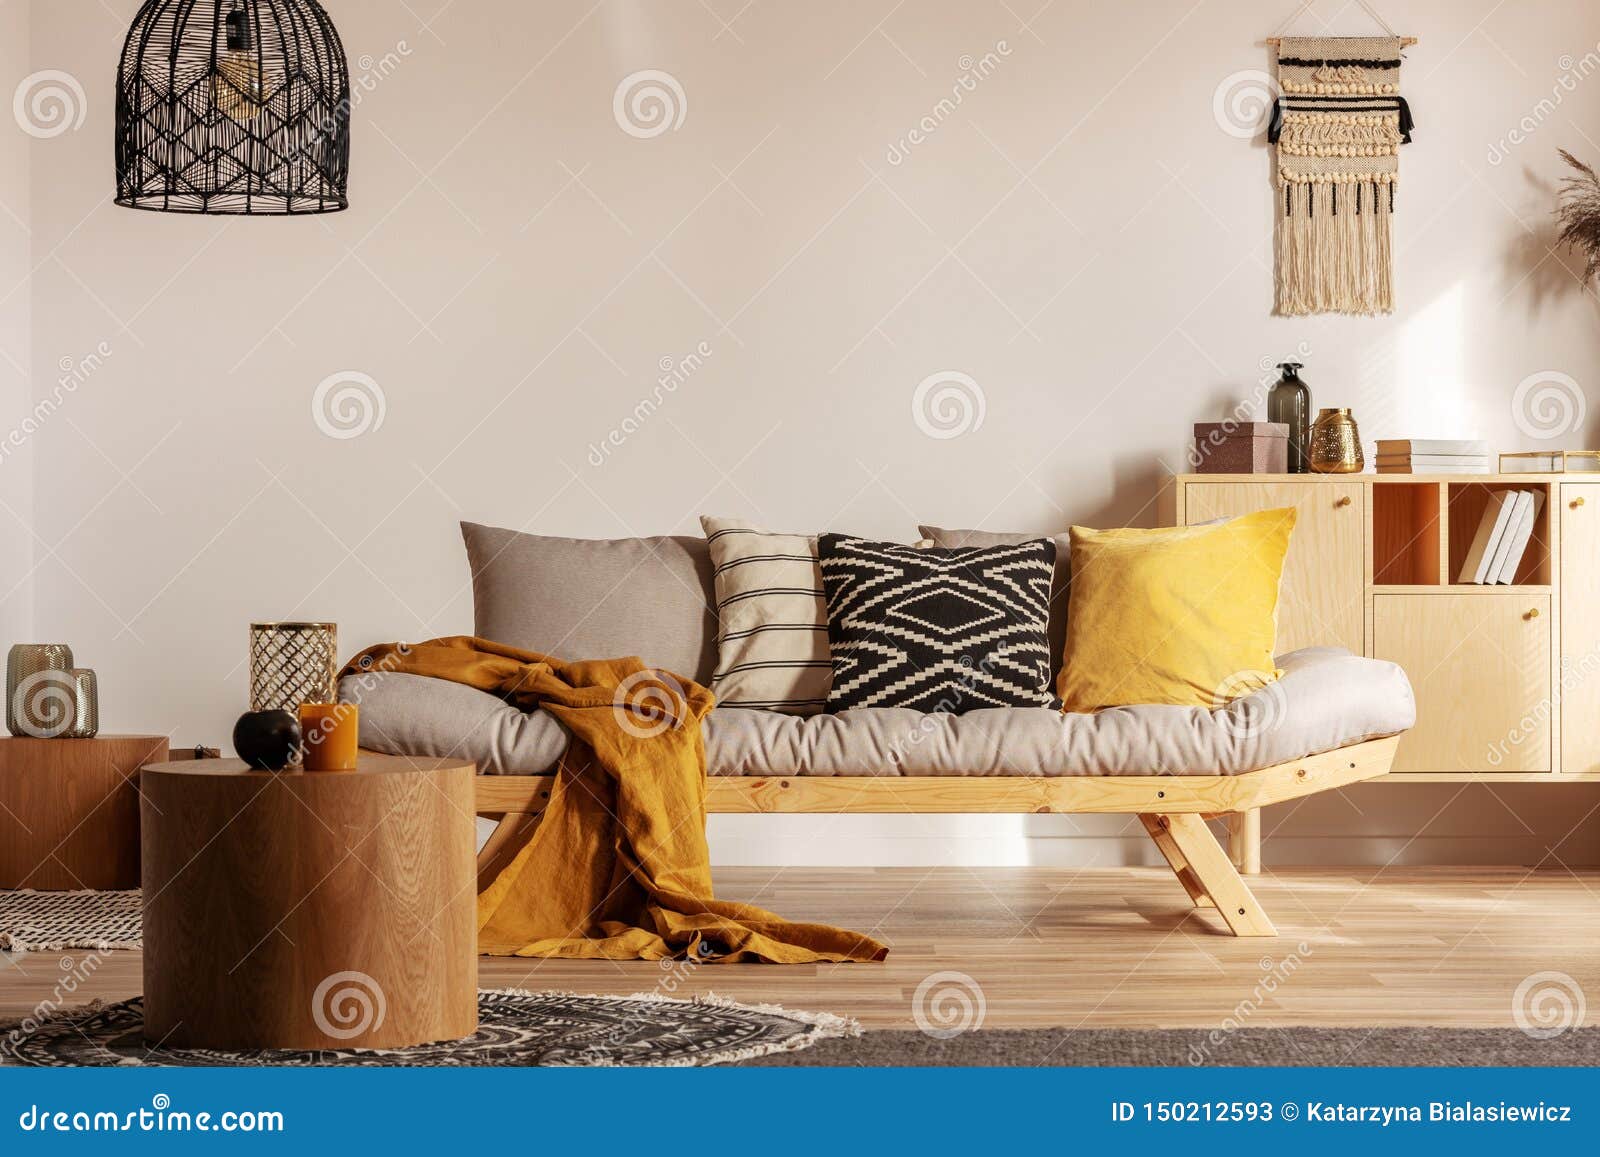 Scandinavian Sofa With Pillows And Dark Yellow Blanket In 